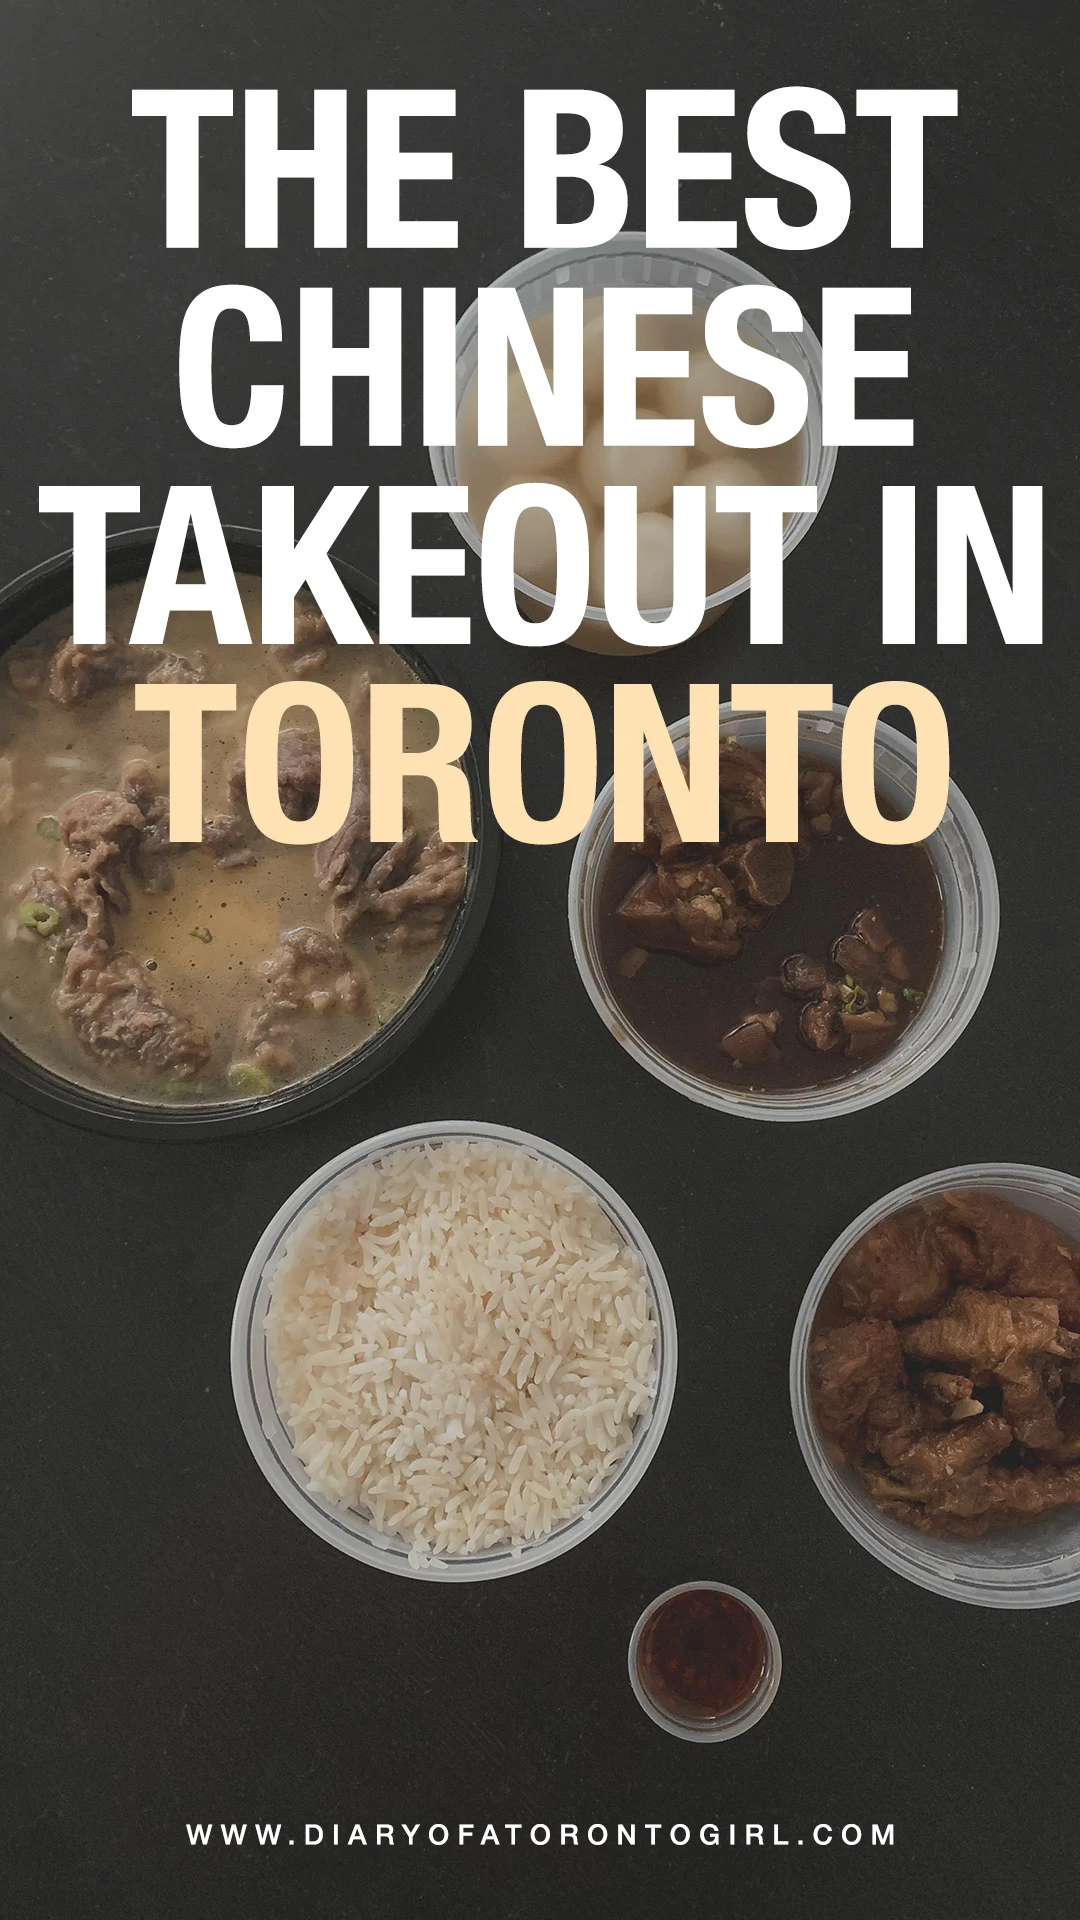 Best Chinese takeout restaurants in Toronto